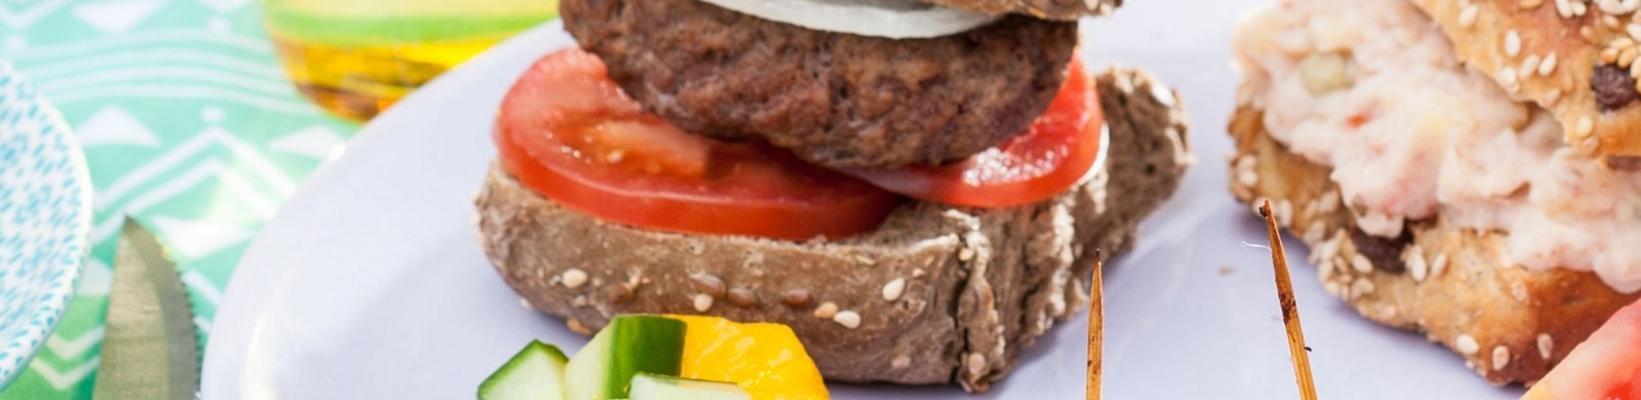 hamburger with creamy beef salad from merlien wellbeing